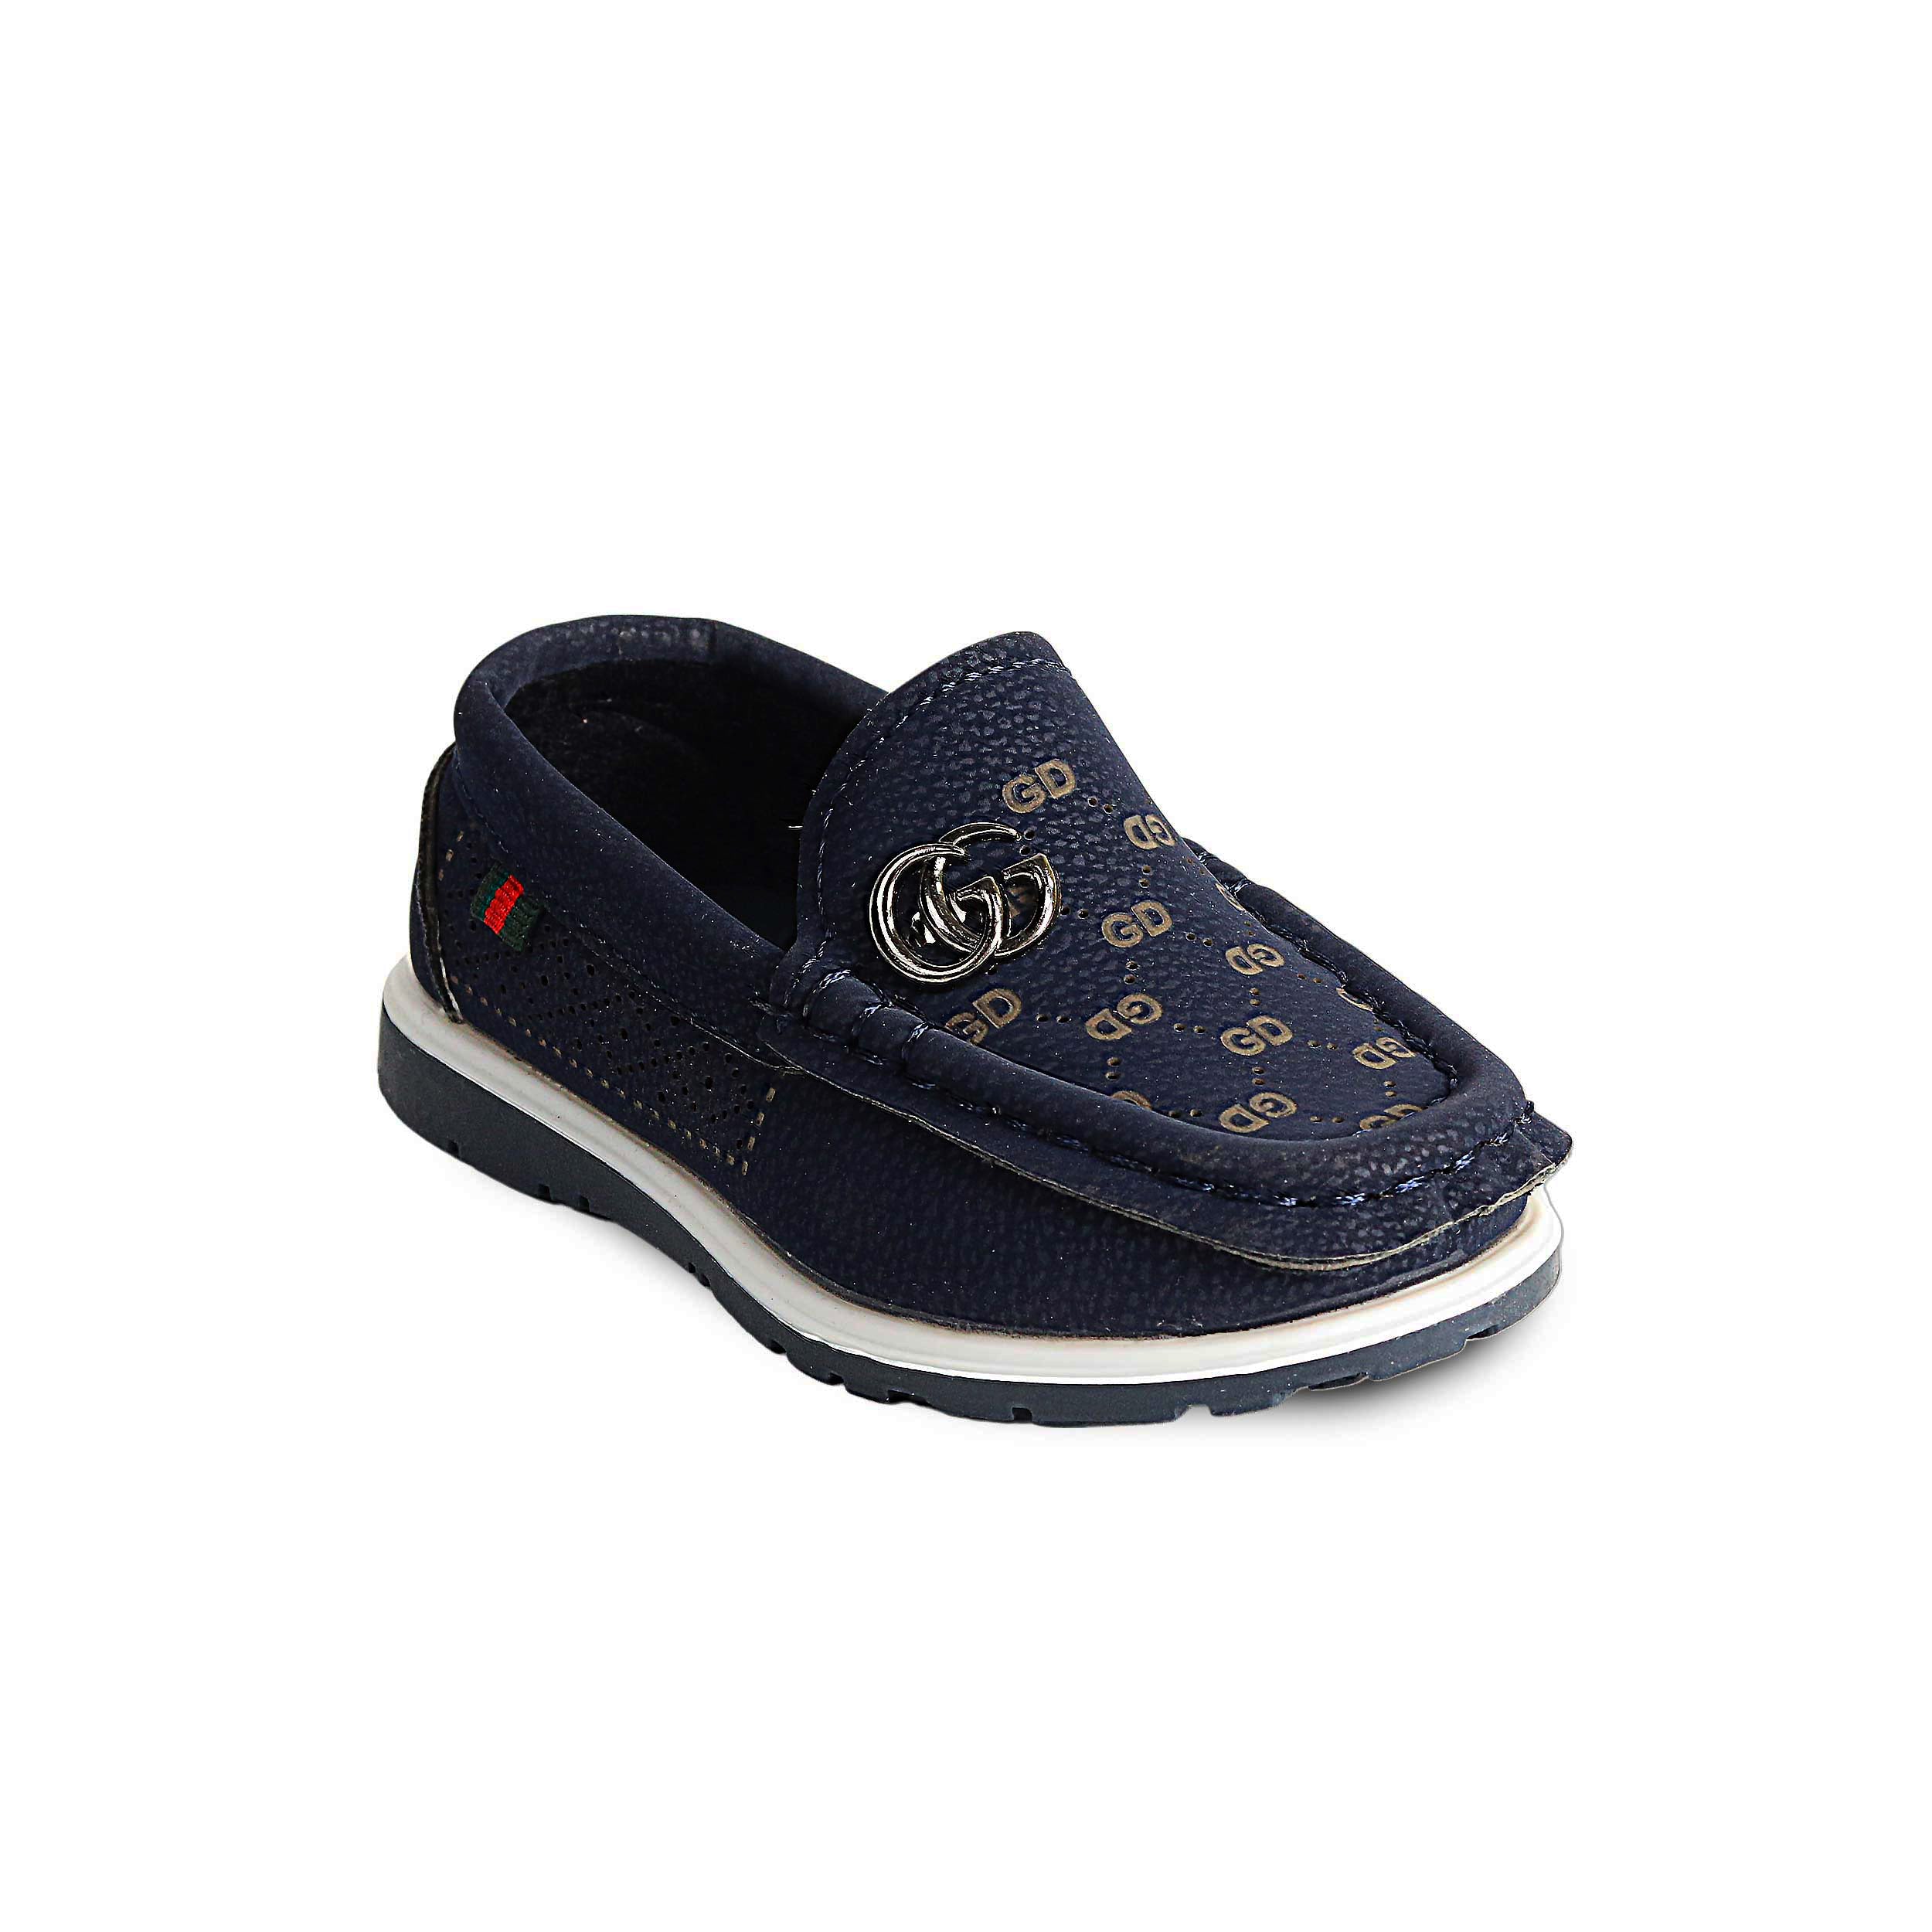 Zays Premium Imported Loafer Shoe For Kids - ZAYSLCC52 (Limited Stock)